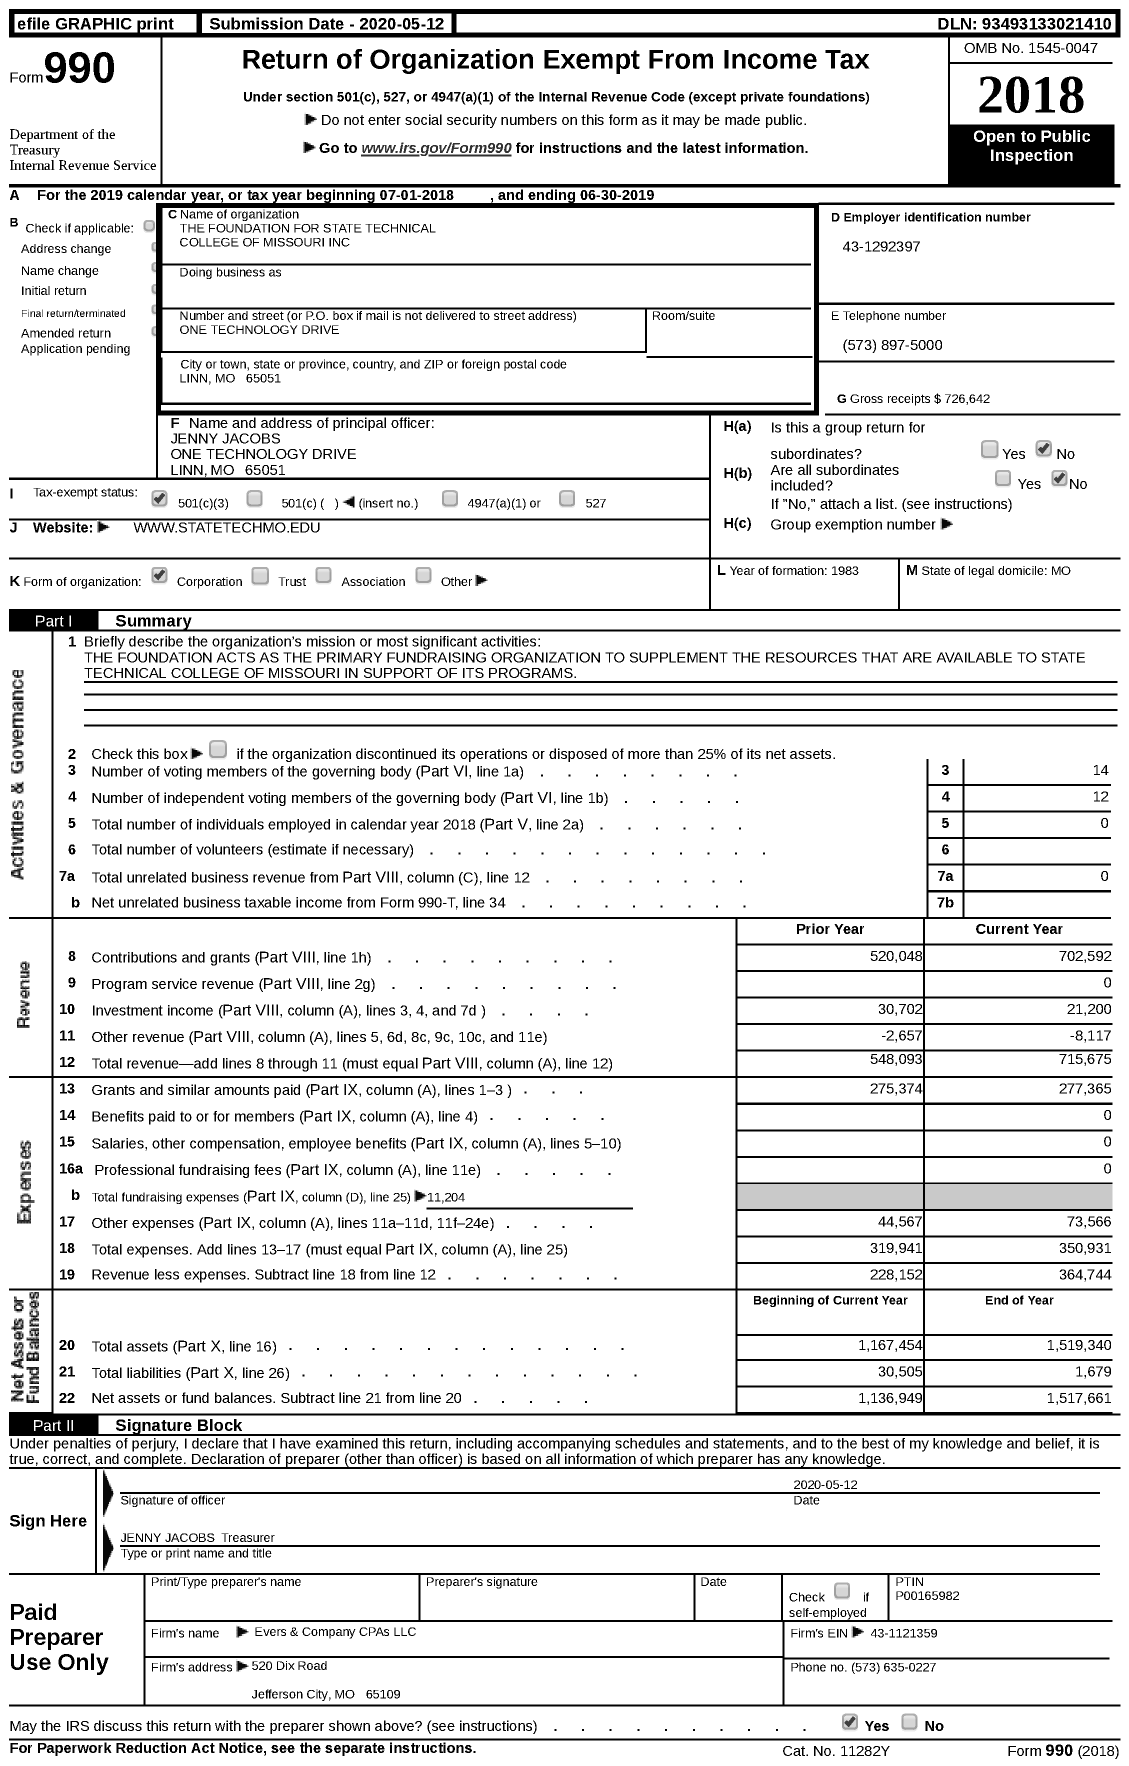 Image of first page of 2018 Form 990 for The Foundation for State Technical College of Missouri